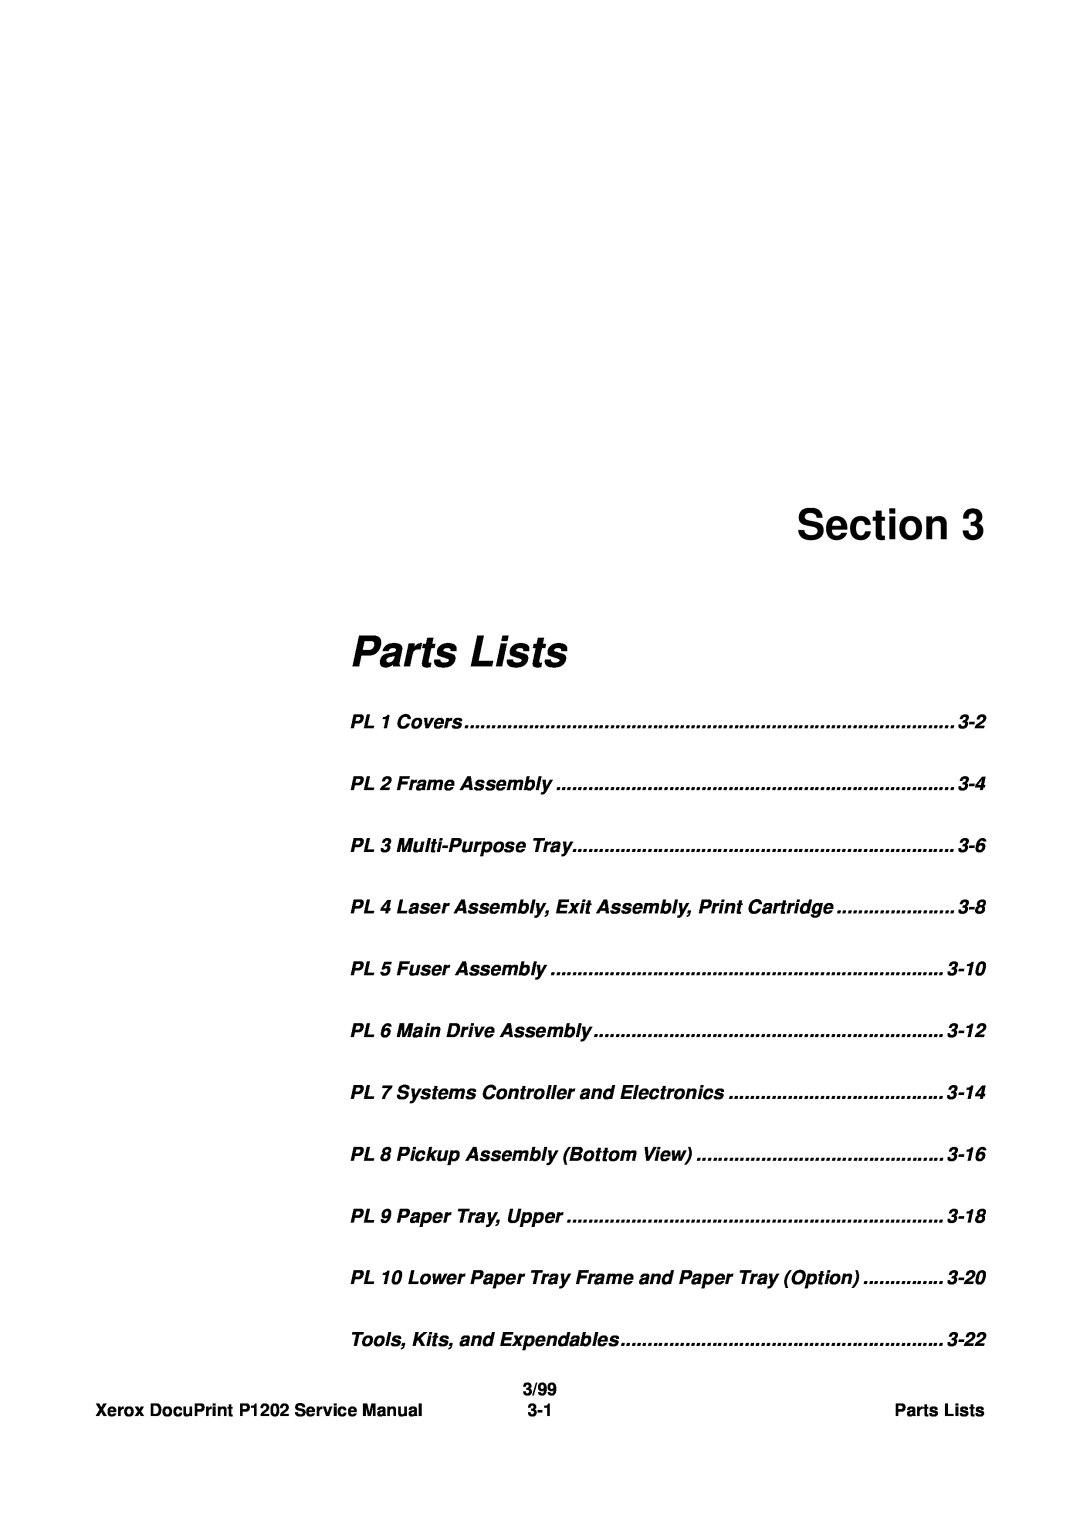 Xerox P1202 service manual Section, Parts Lists, PL 1 Covers, 3-10, 3-12, 3-14, 3-16, 3-18, 3-20, 3-22 